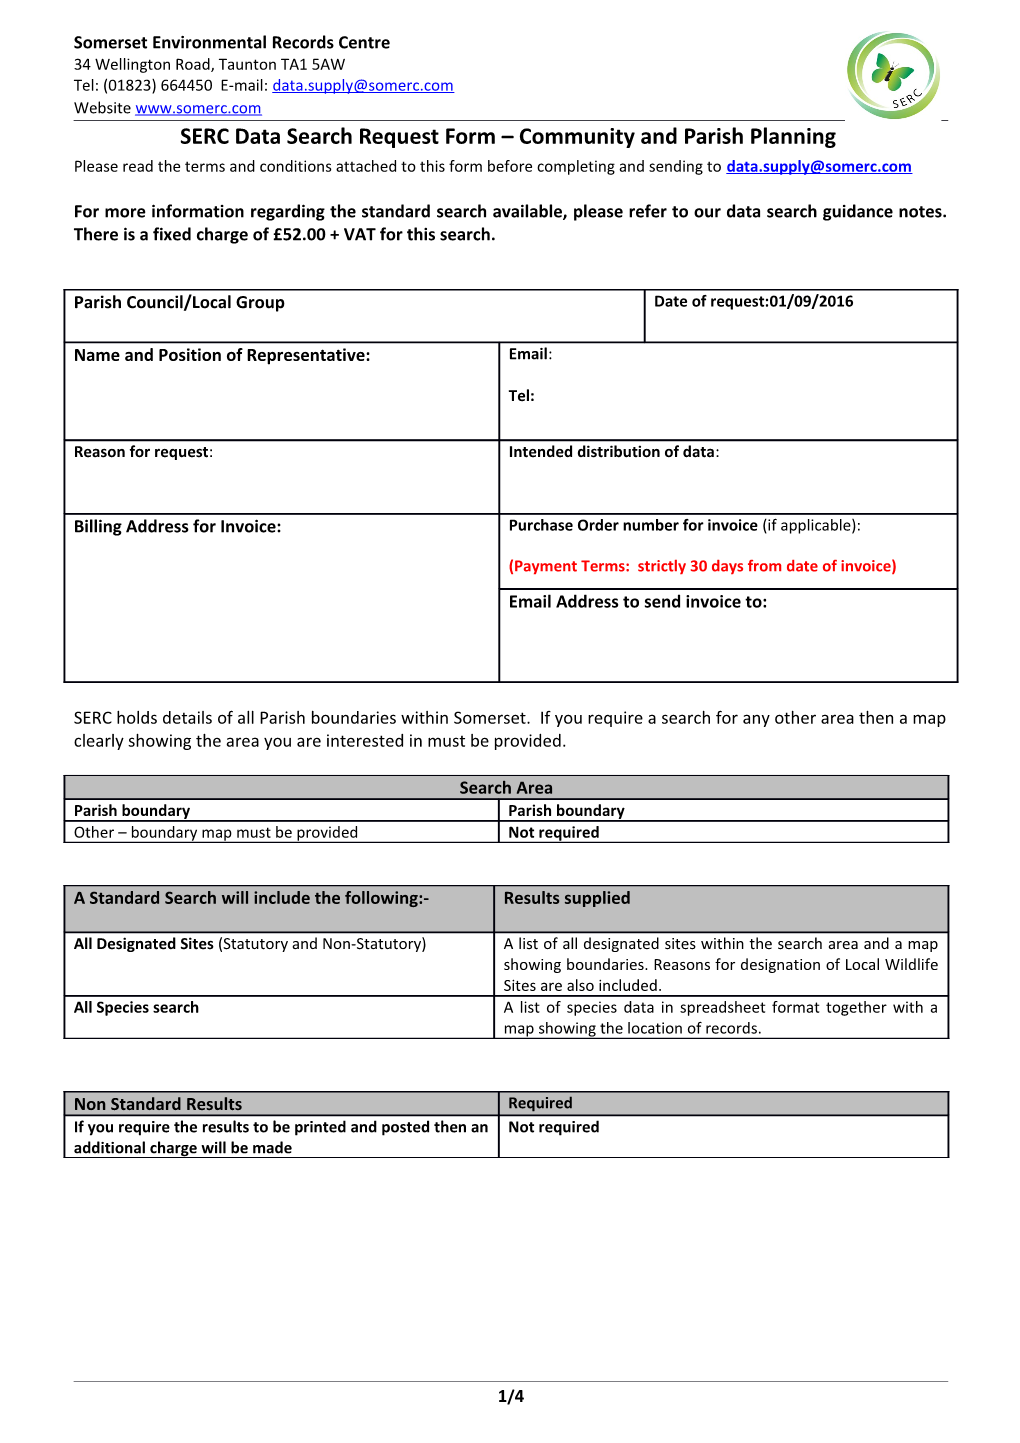 Please Read the Guidance Notes Attached to This Form Before Completing